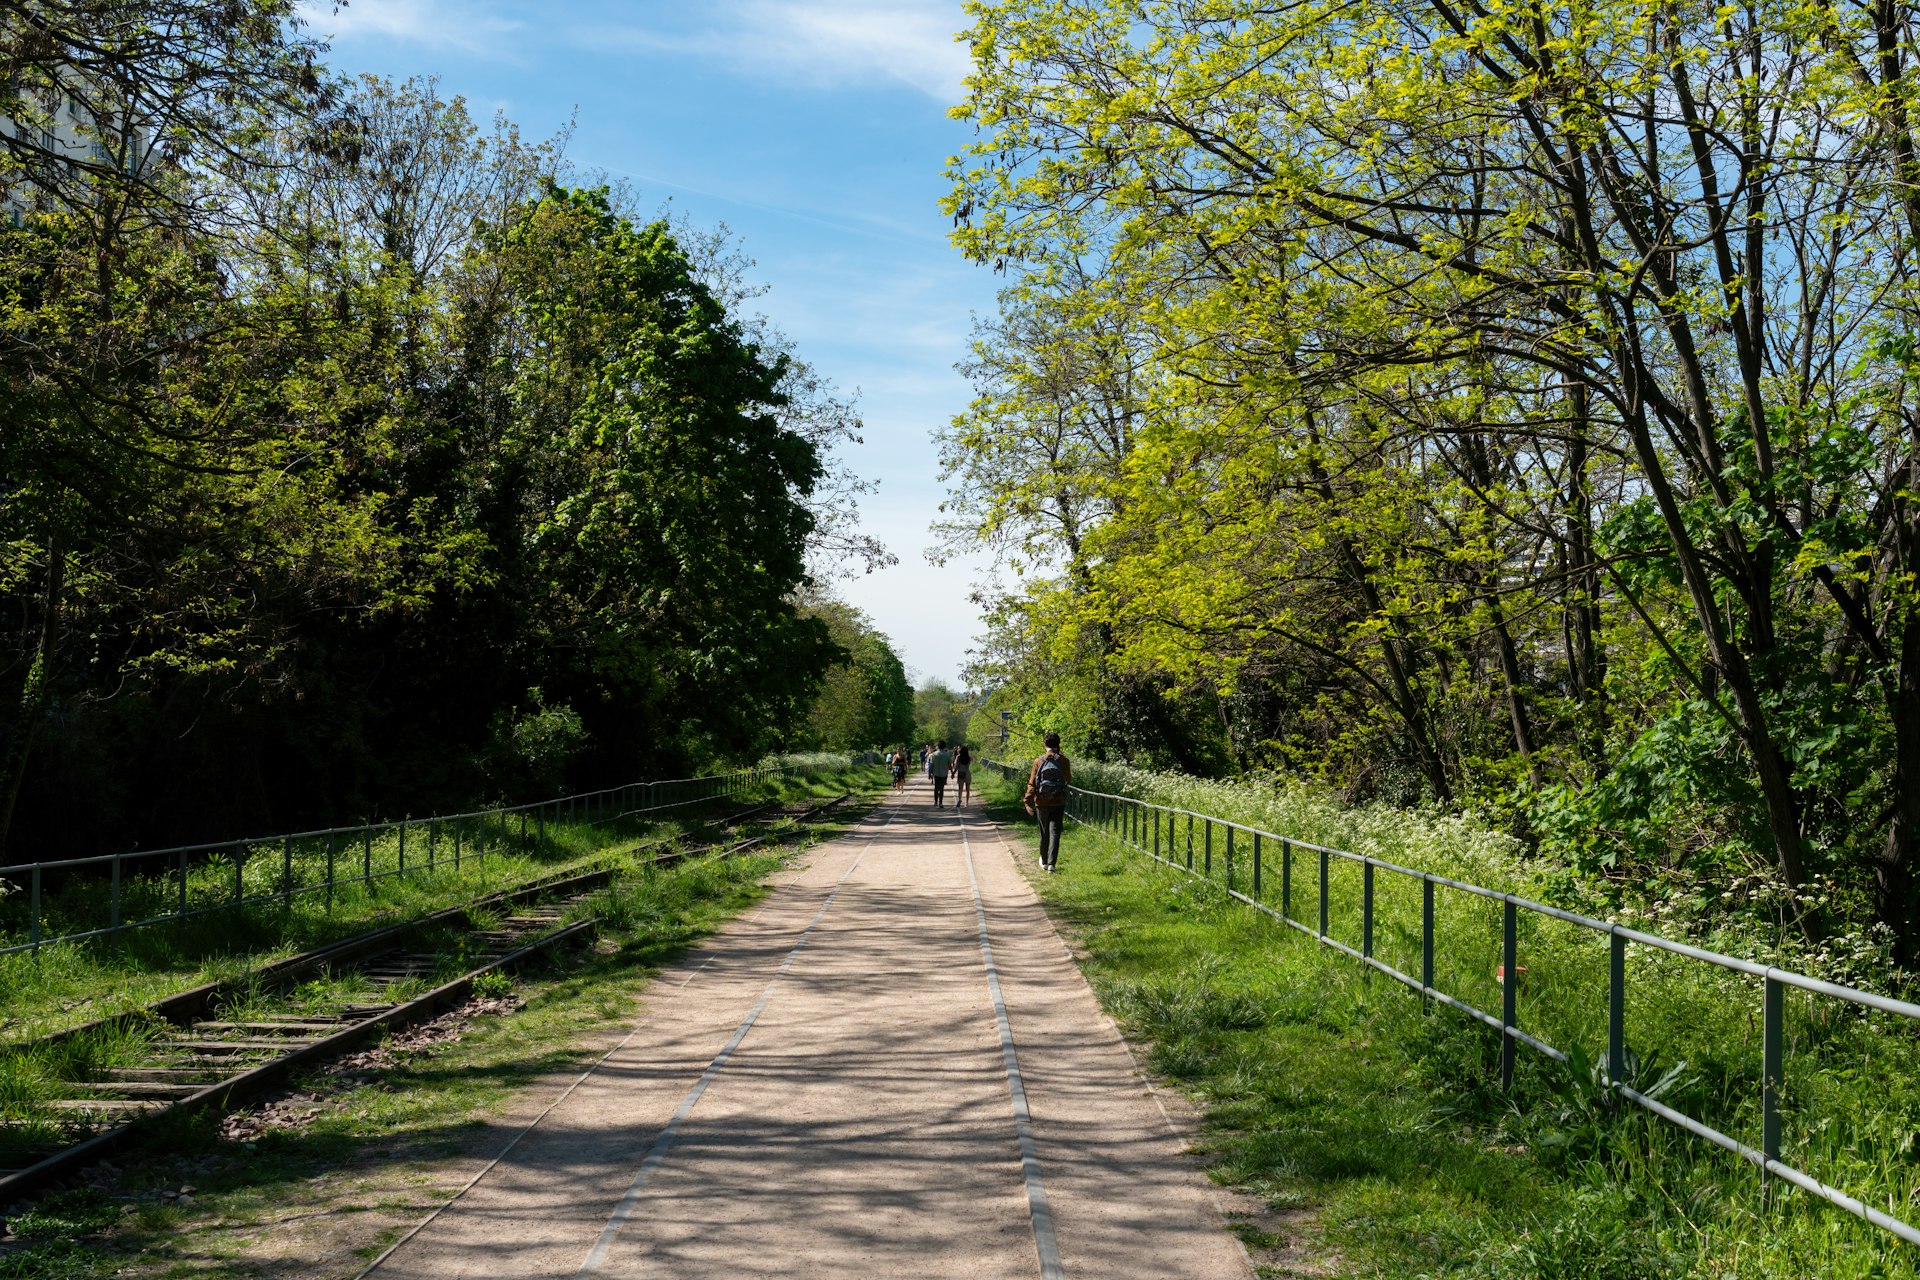 People walking on a path alongside a disused railway track, which is lined by trees and bushes.